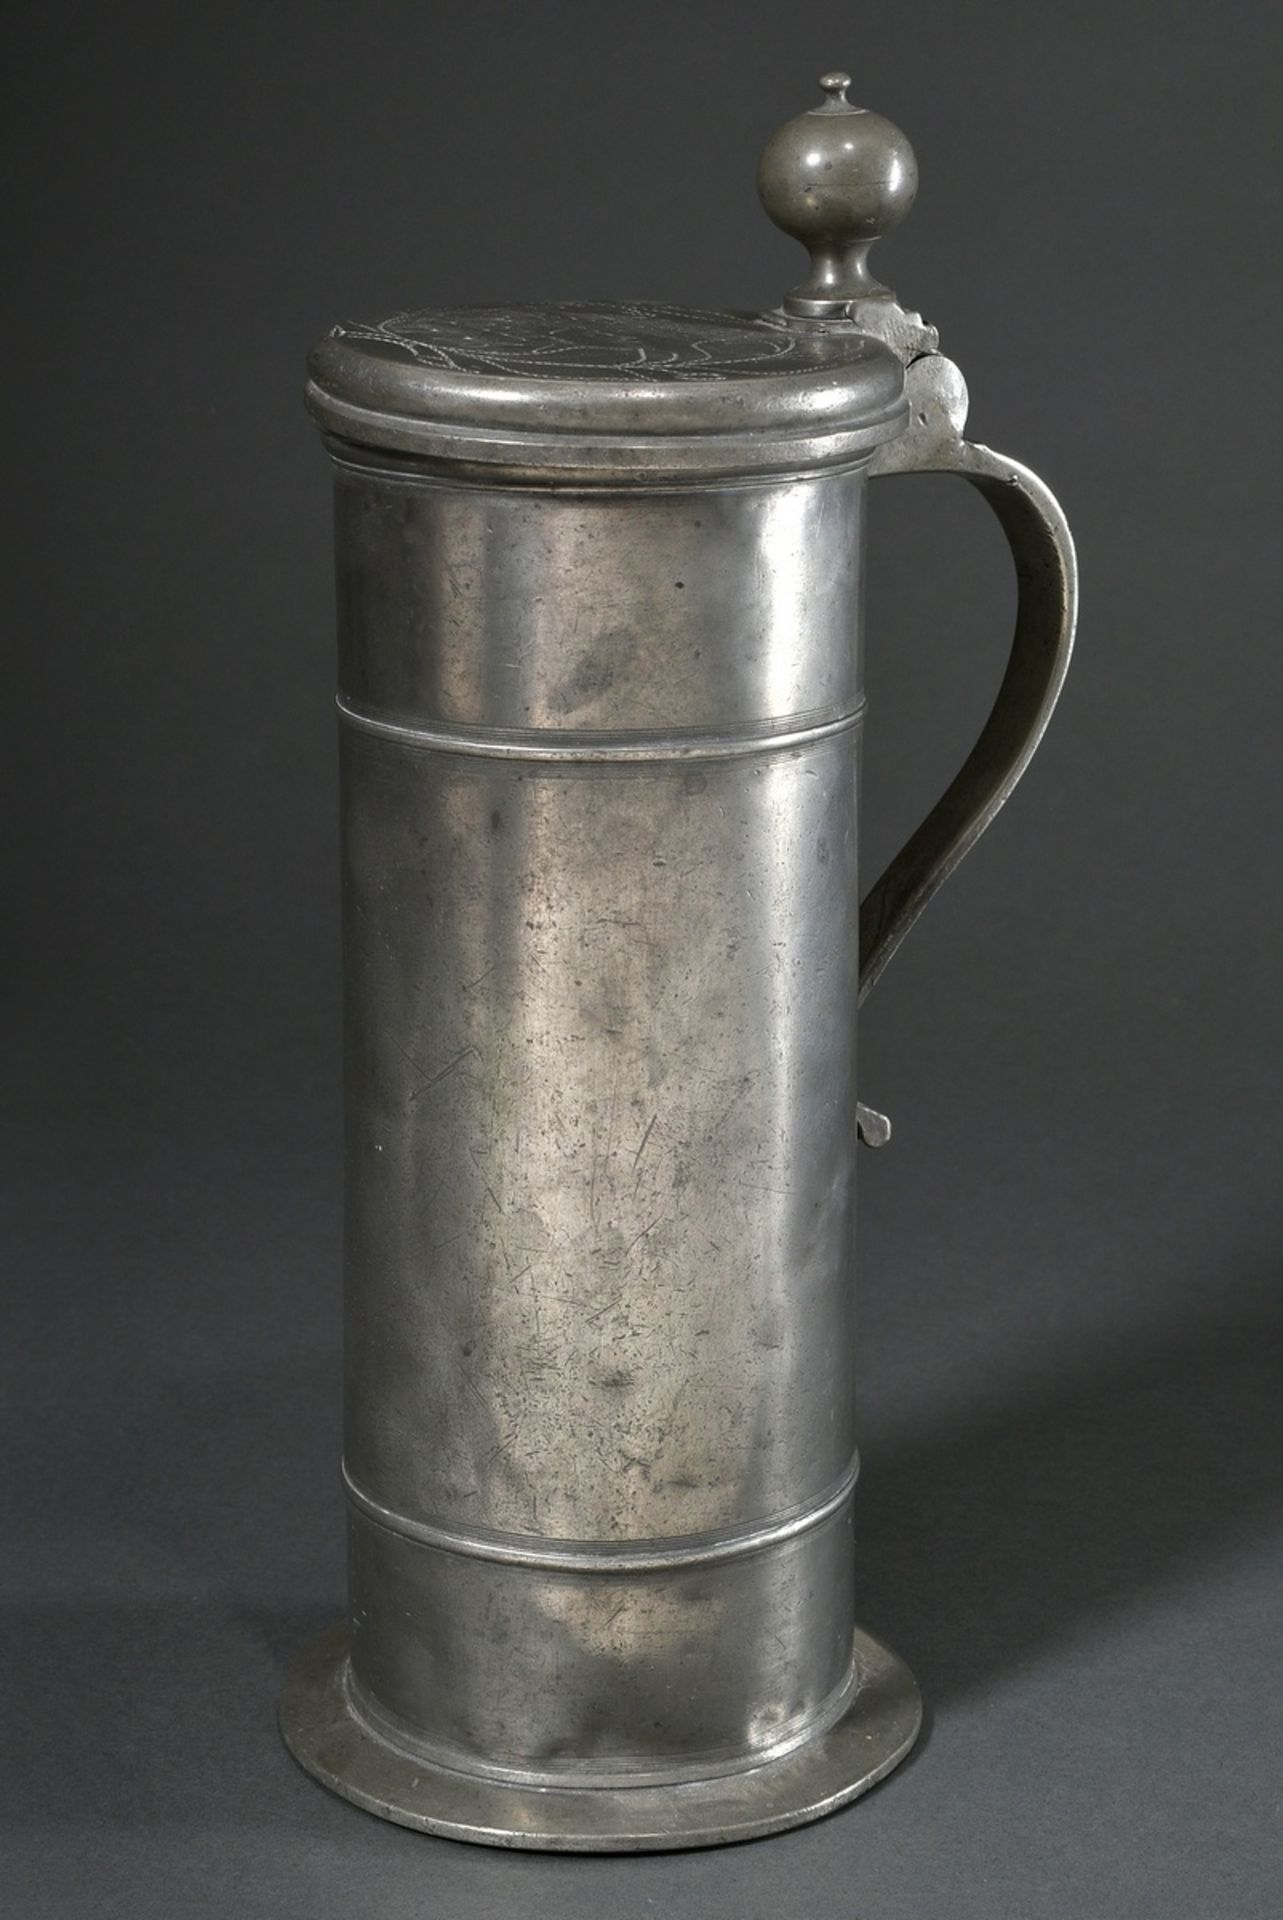 Tall pewter lidded tankard with floral engraved decoration and owner's inscription "Asmus Hinrich M